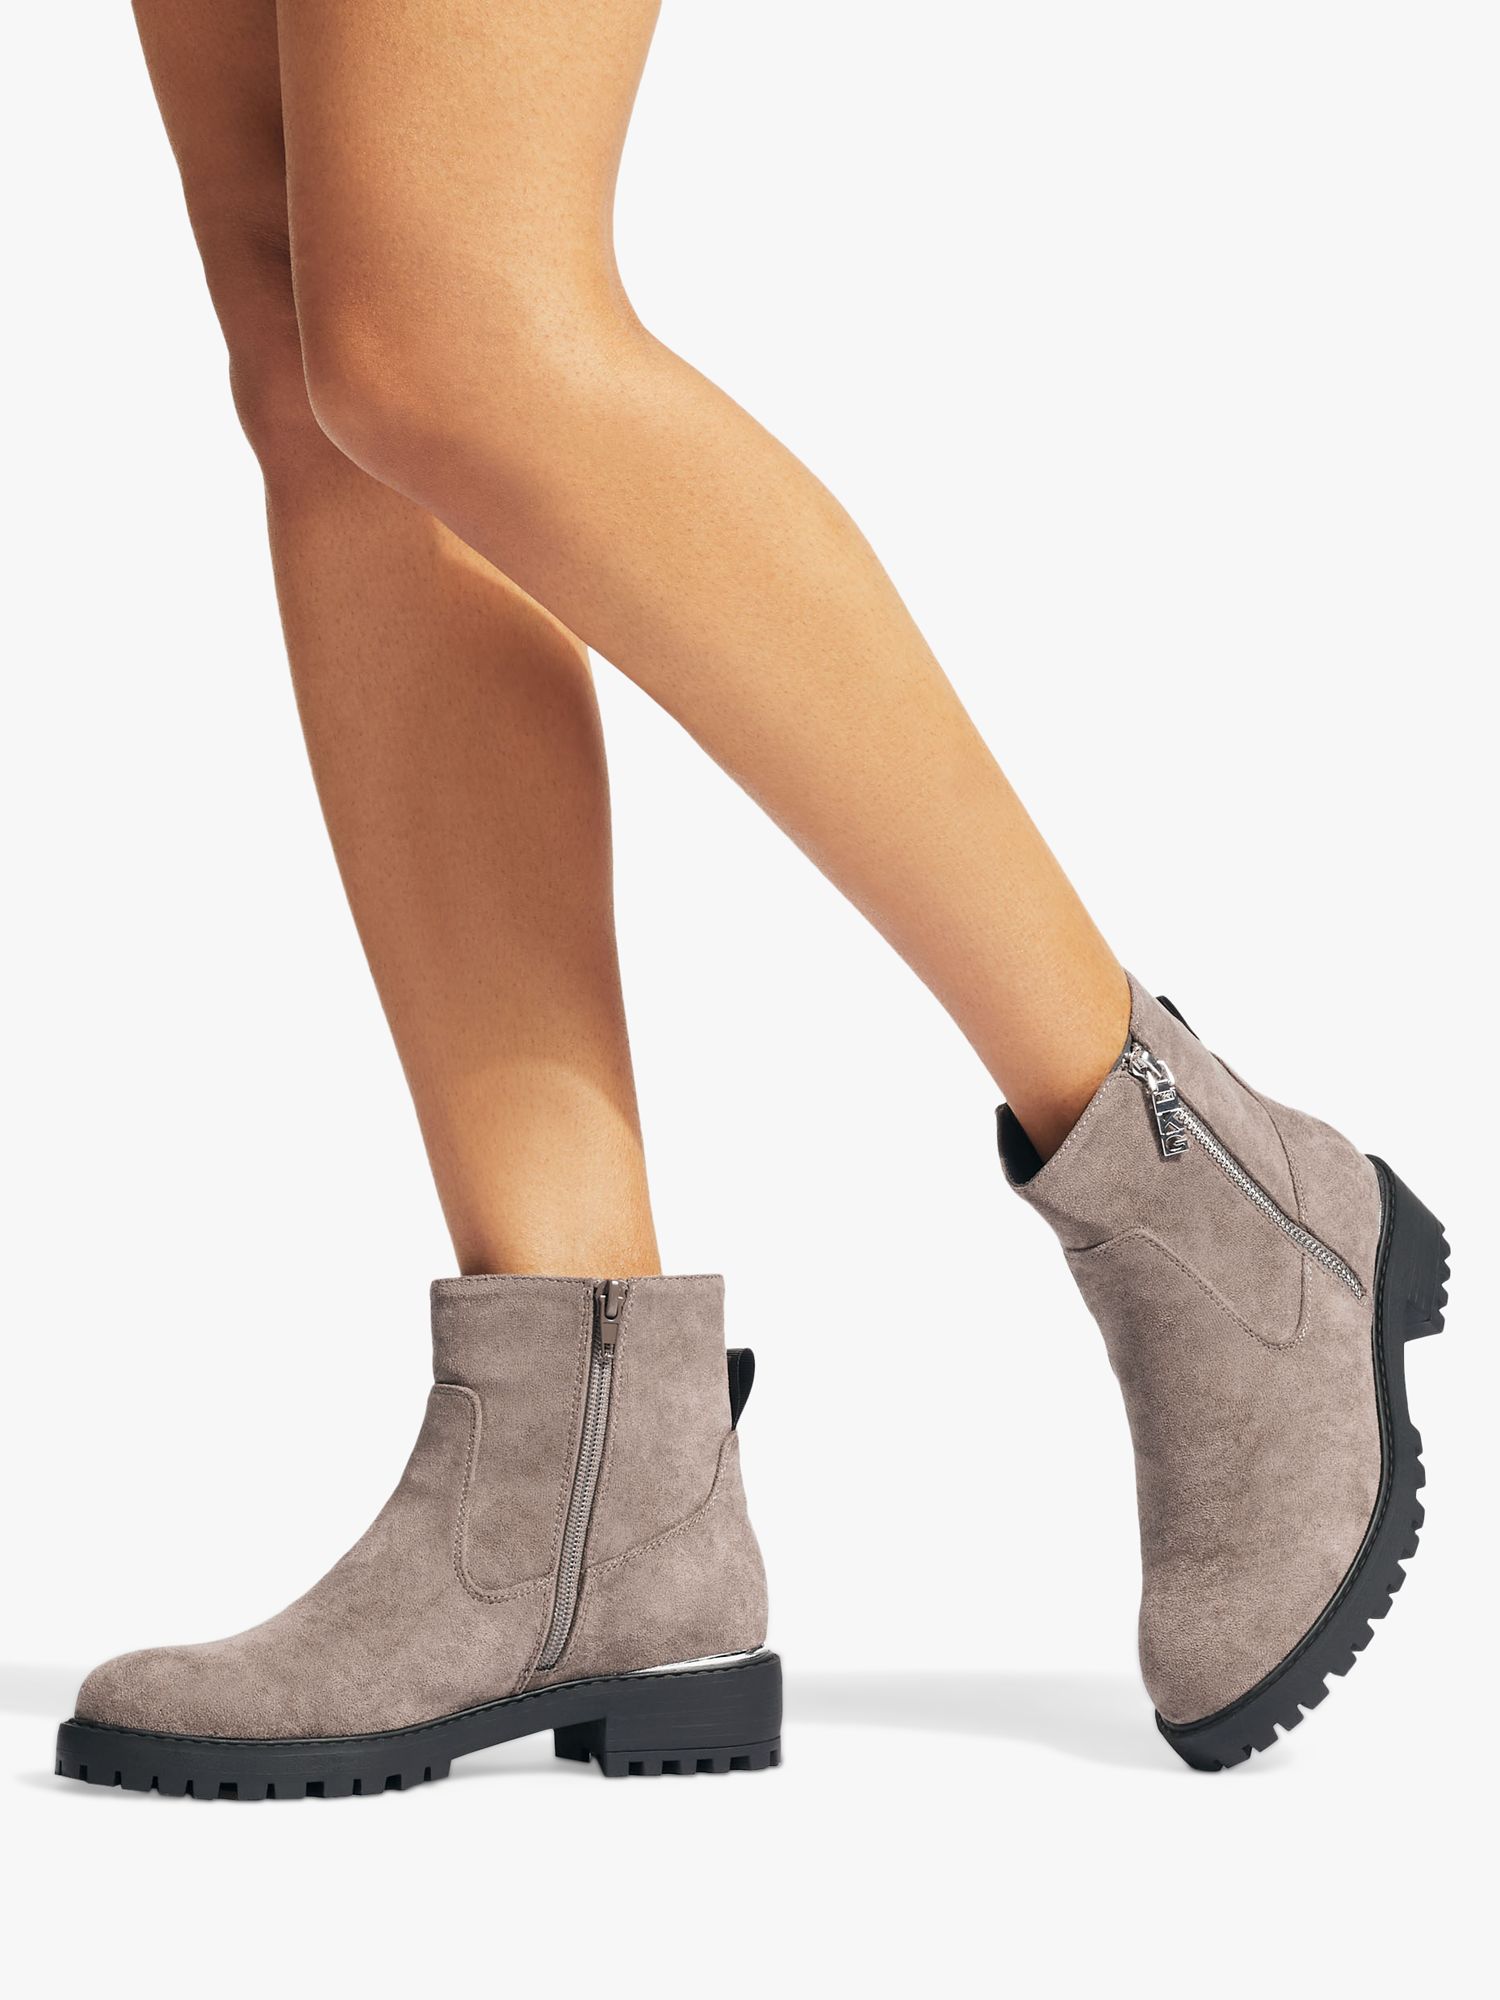 Buy KG Kurt Geiger Tahira Suede Ankle Boots, Taupe Online at johnlewis.com